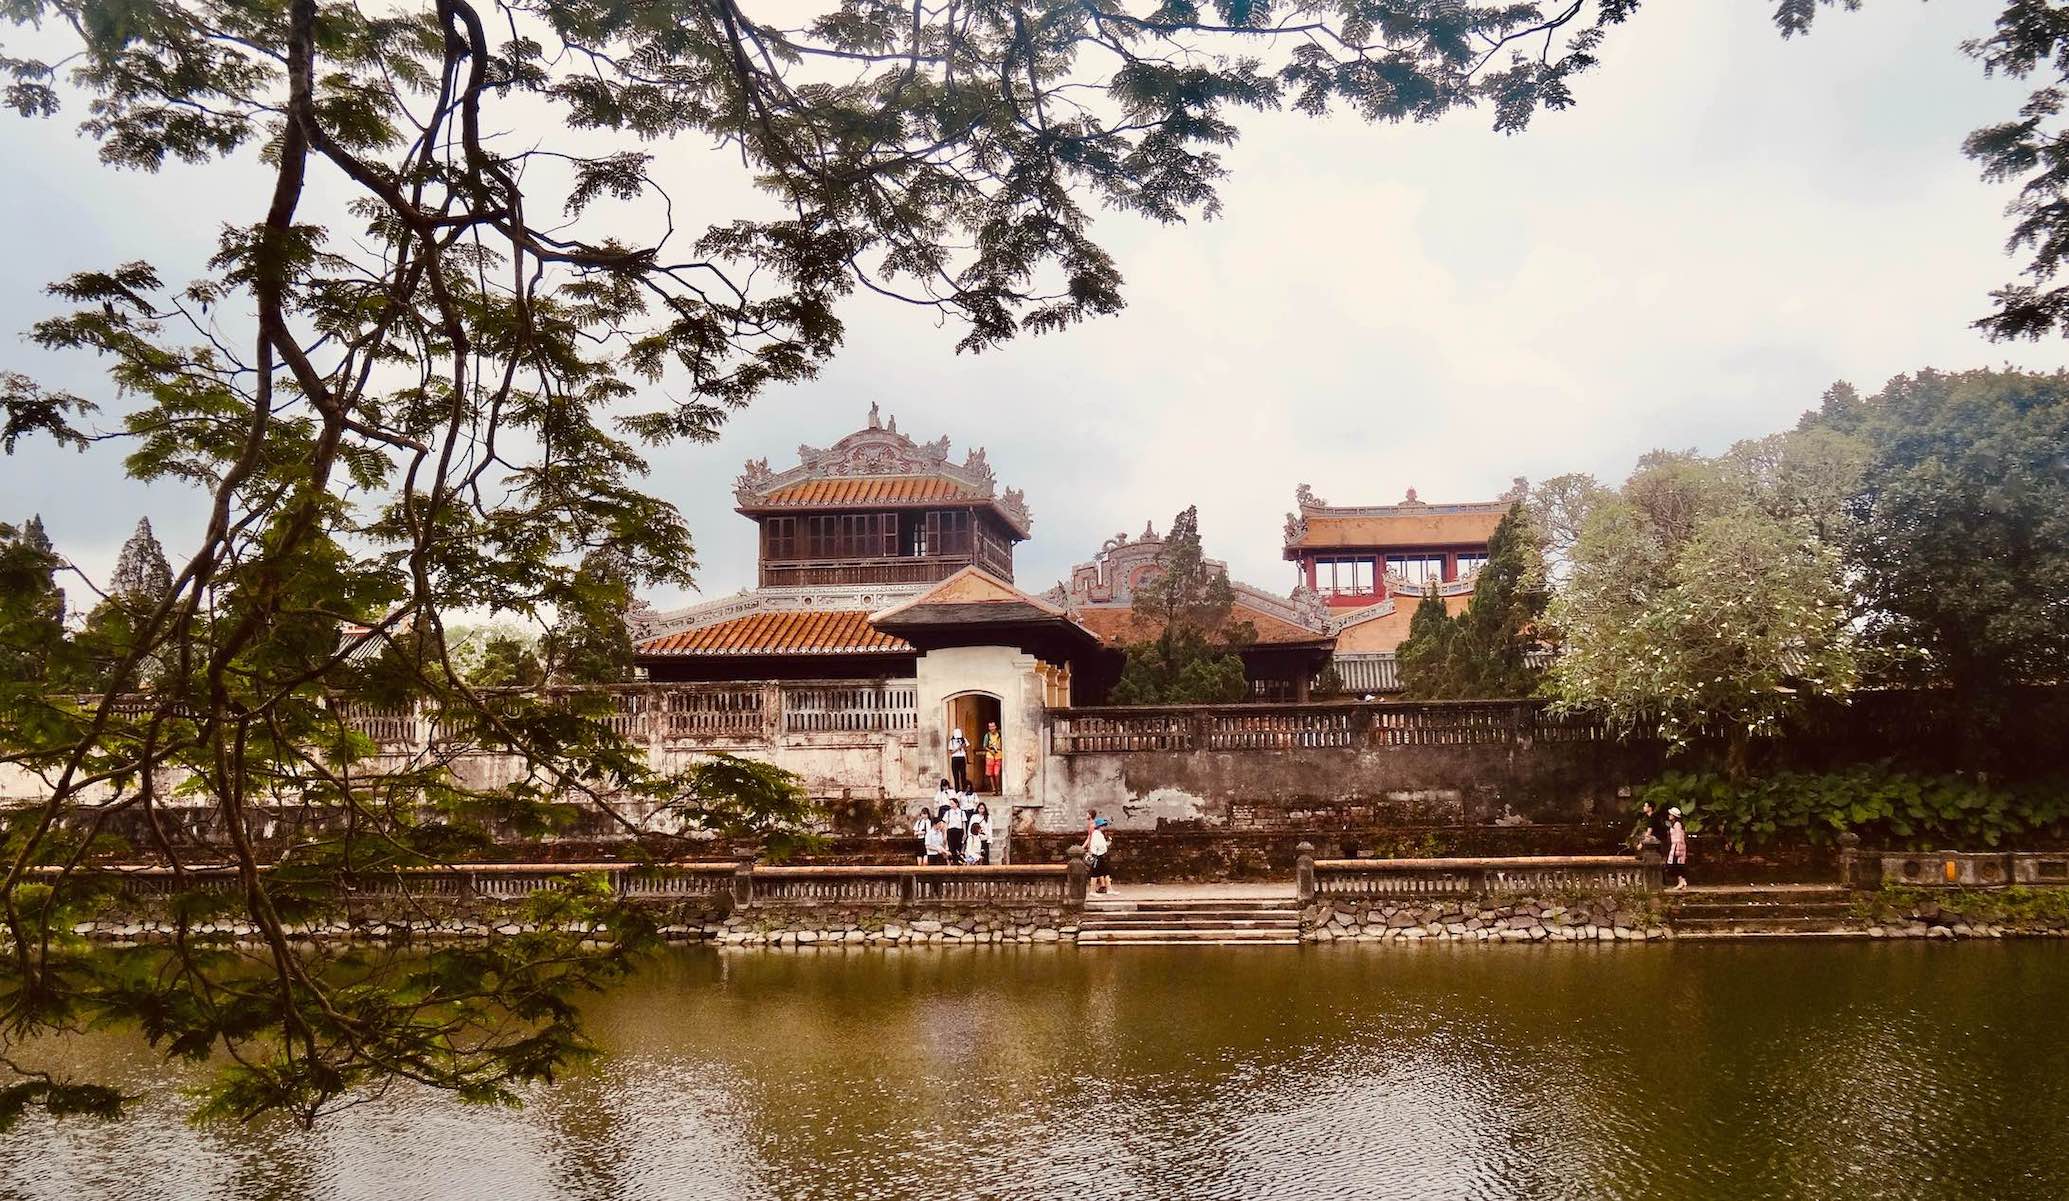 Outer wall and moat The Imperial City Hue